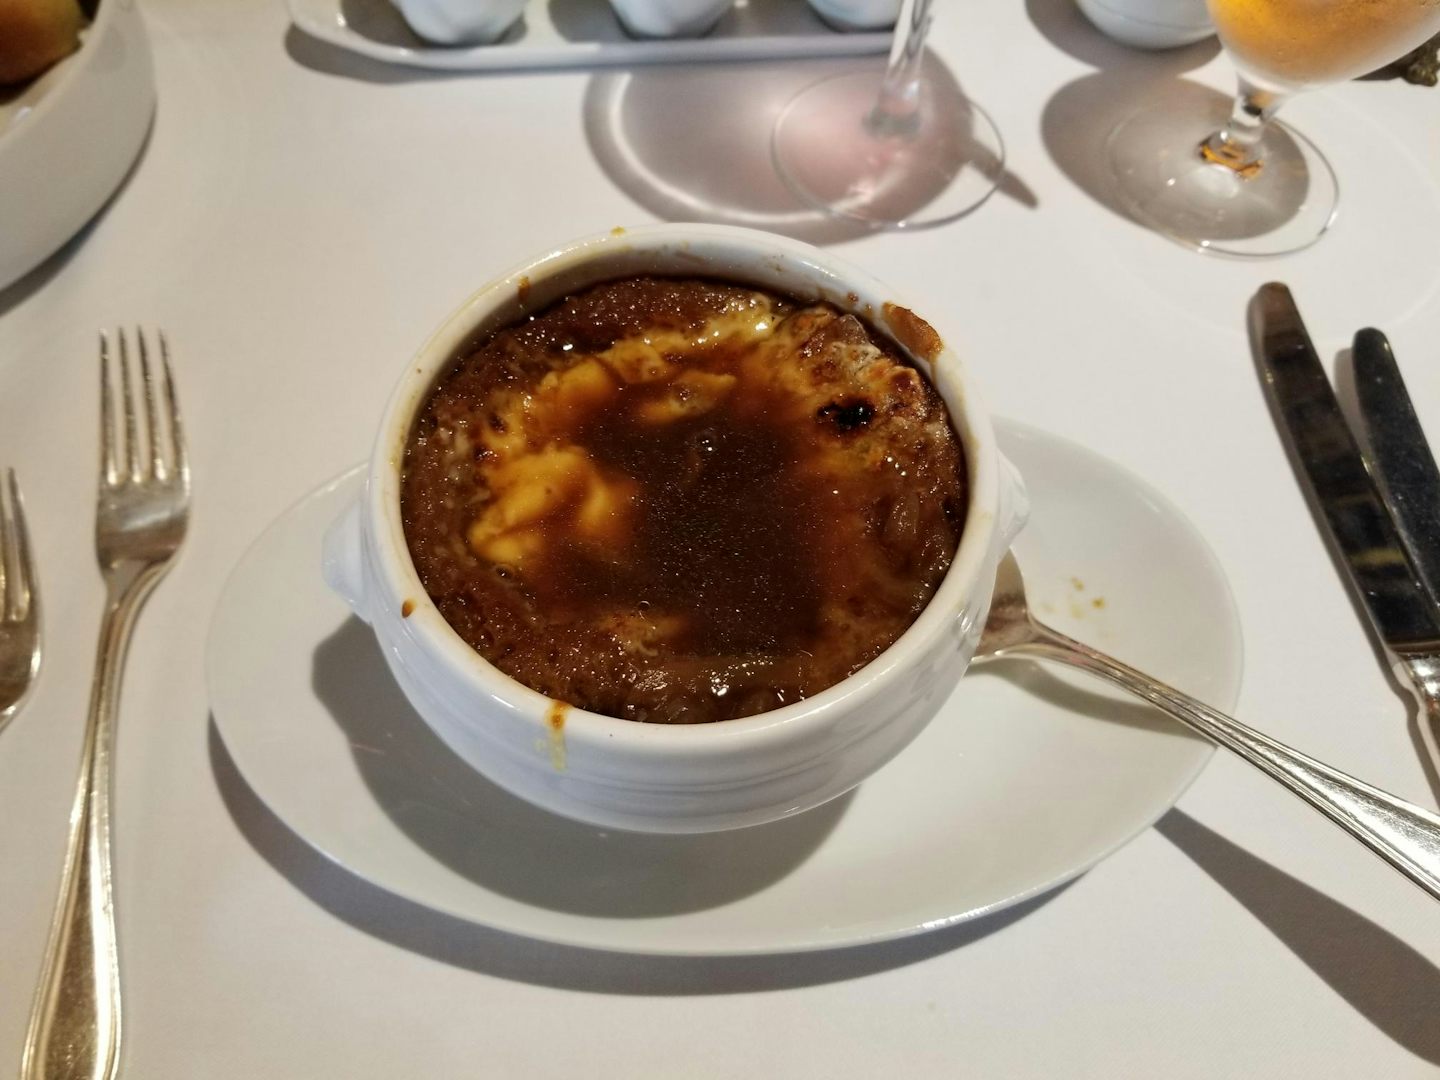 French Onion soup in the Steak house!